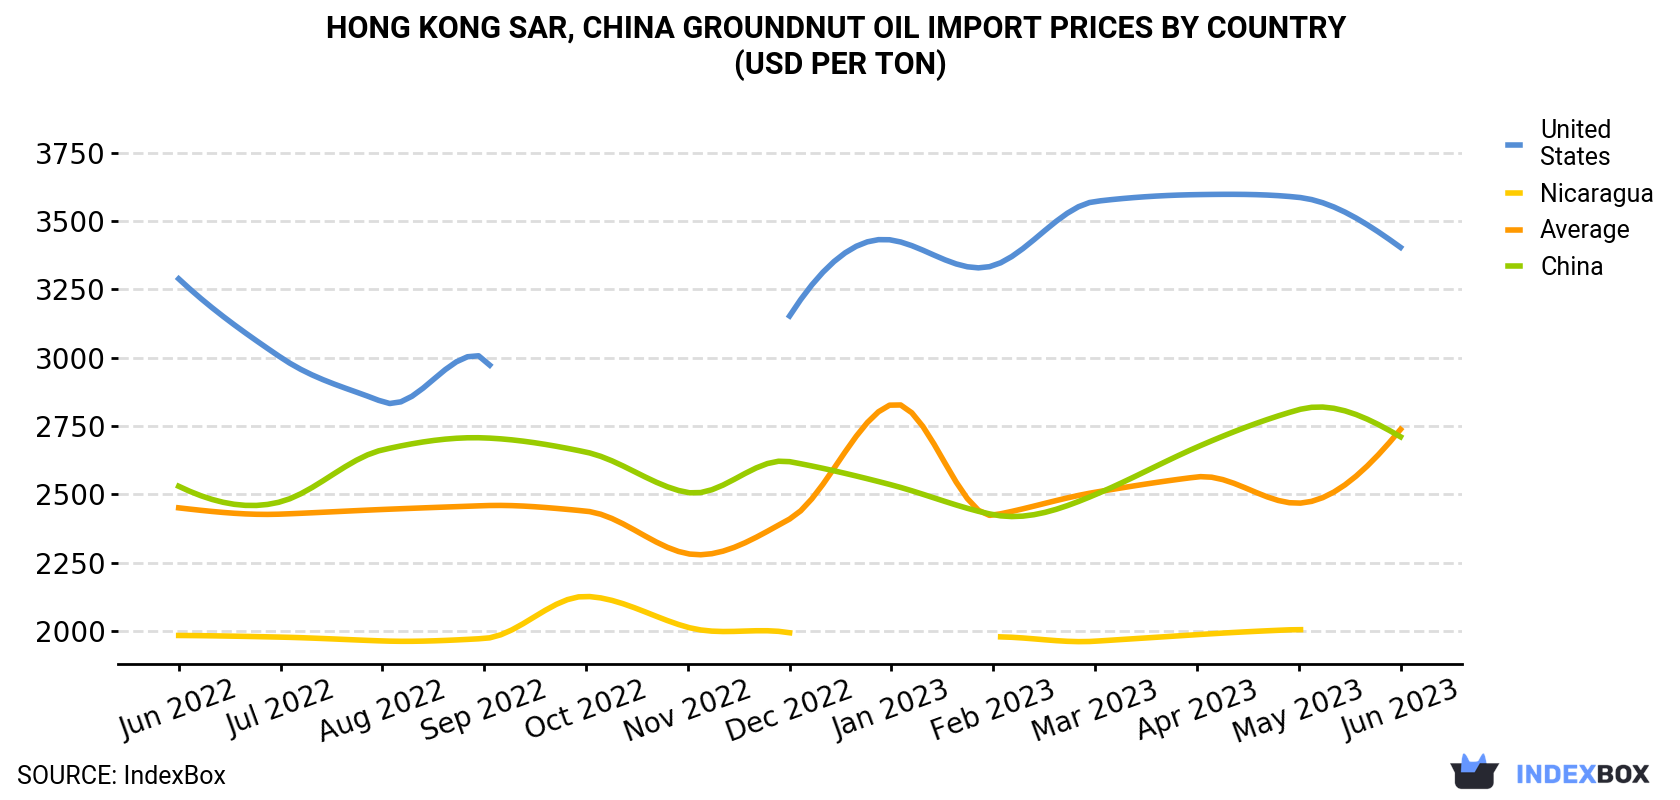 Hong Kong Groundnut Oil Import Prices By Country (USD Per Ton)